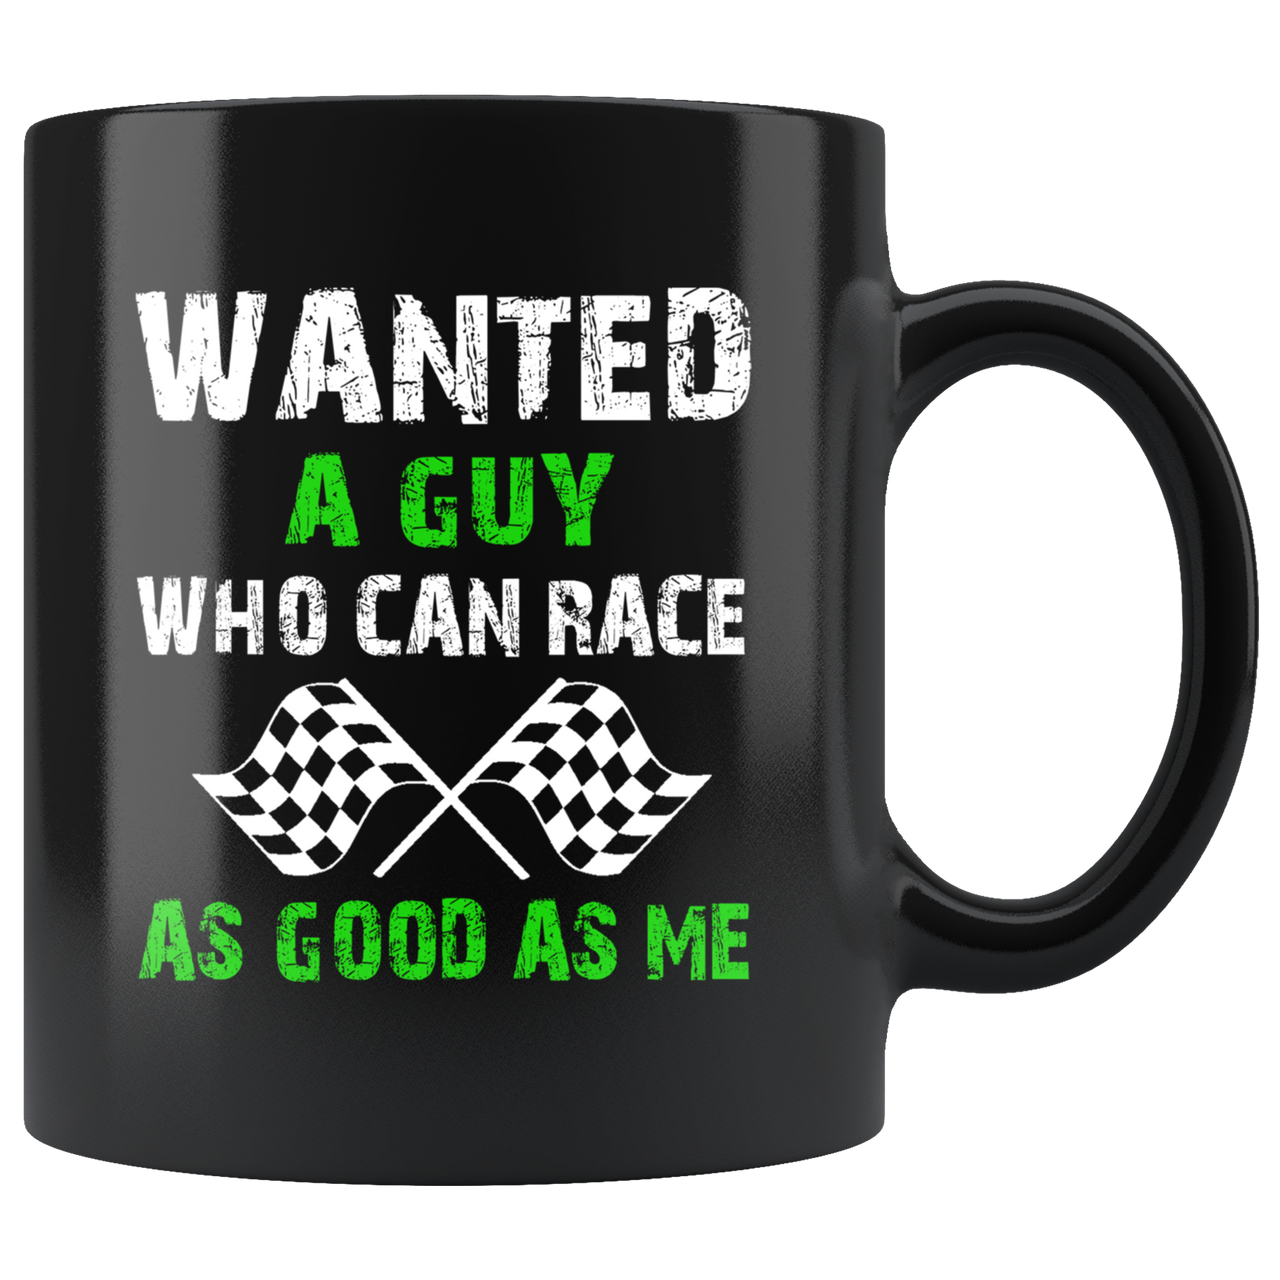 Wanted A Guy Who Can Race As Good As Me Mug!